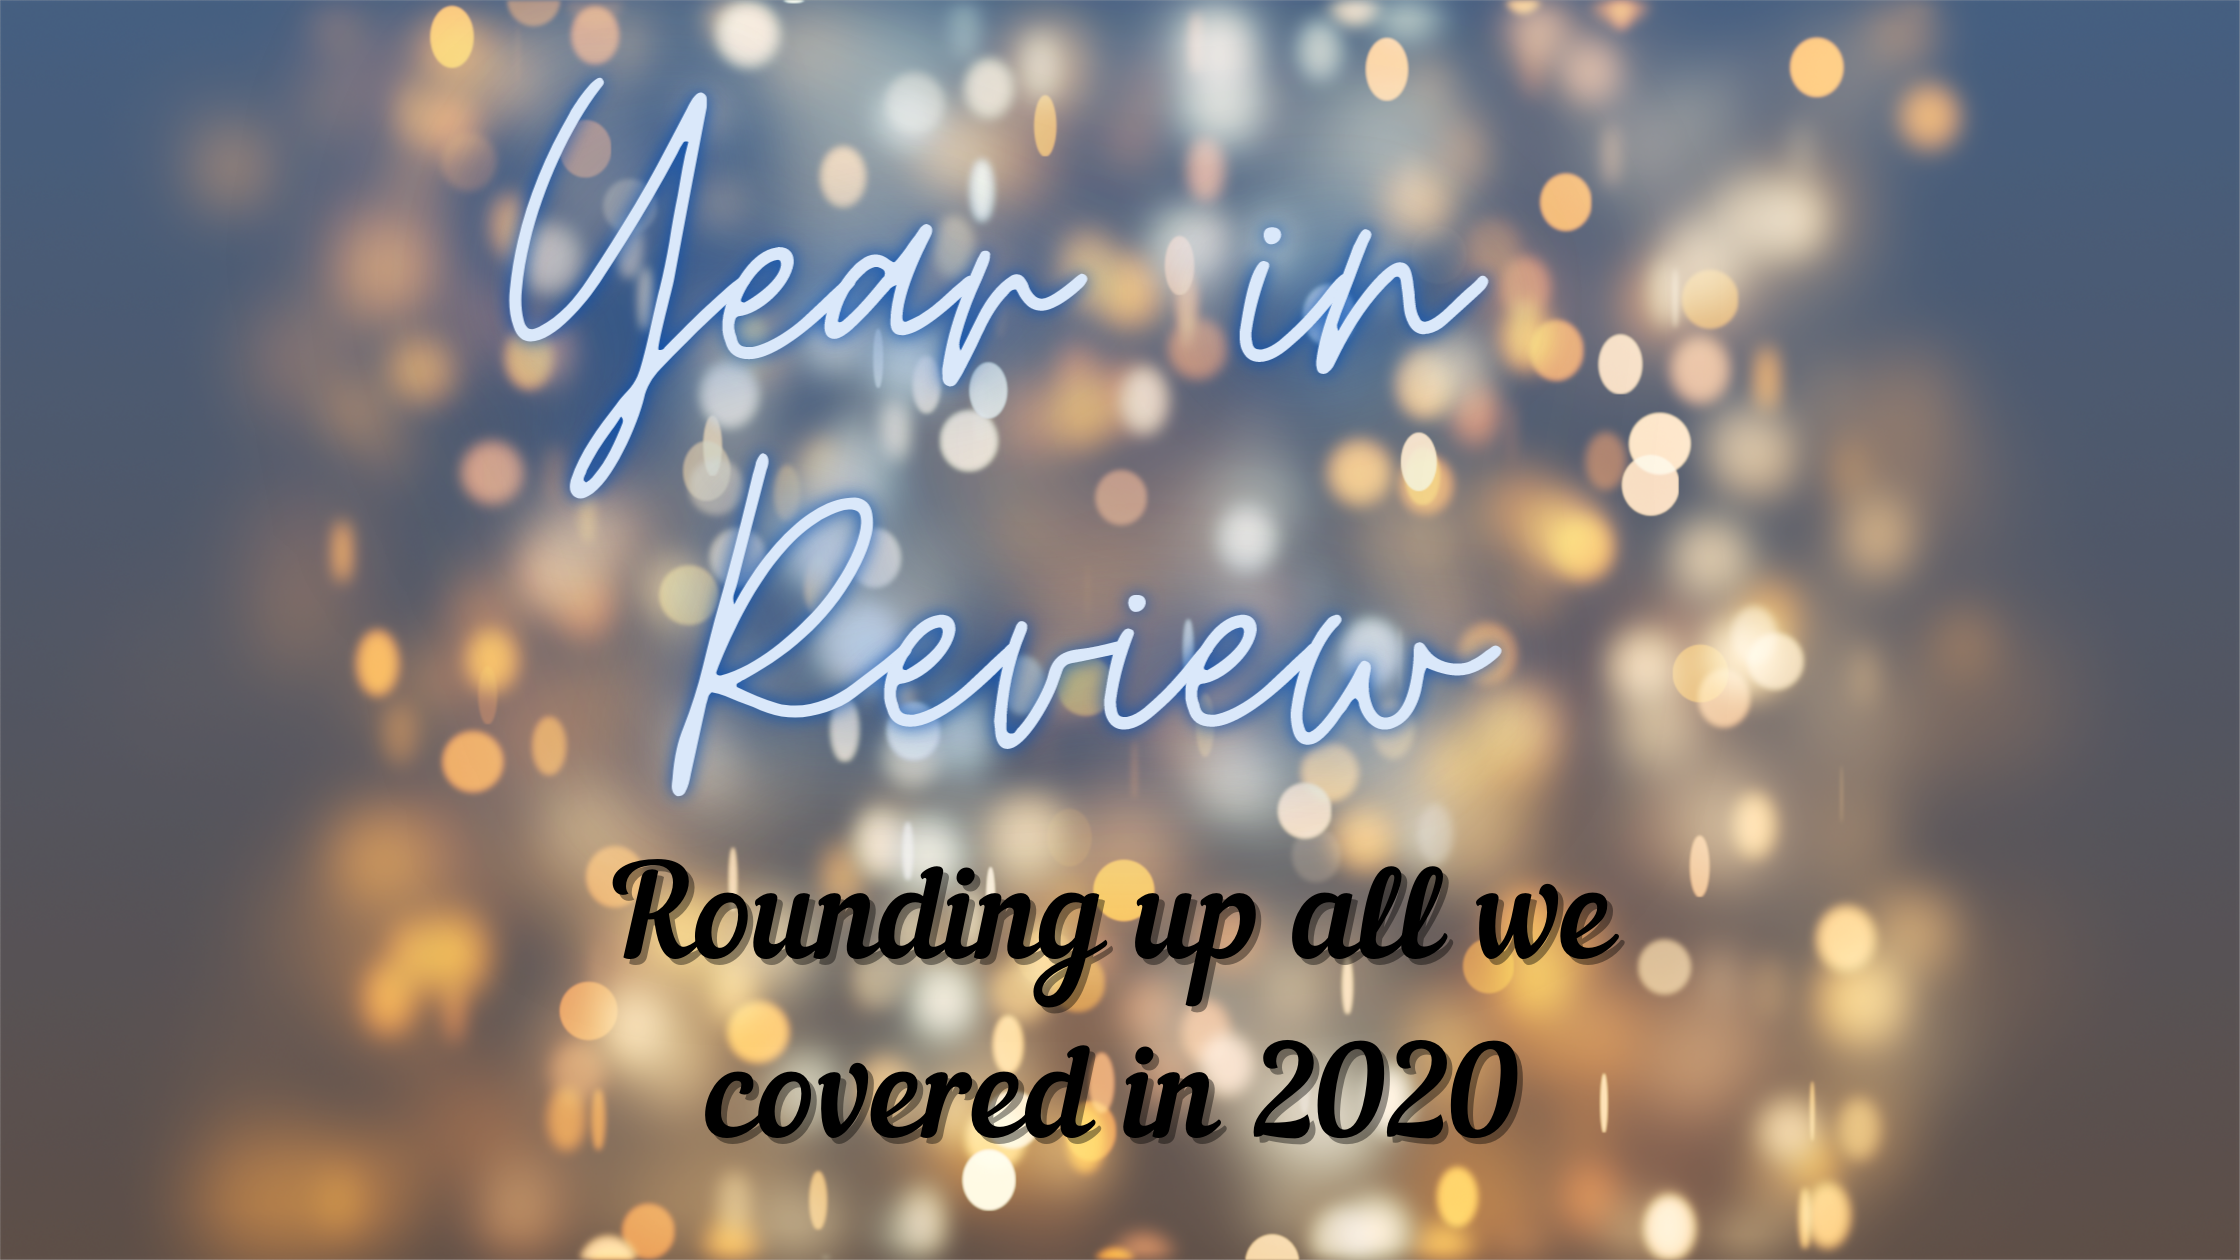 Year in Review: Rounding up all we covered in 2020